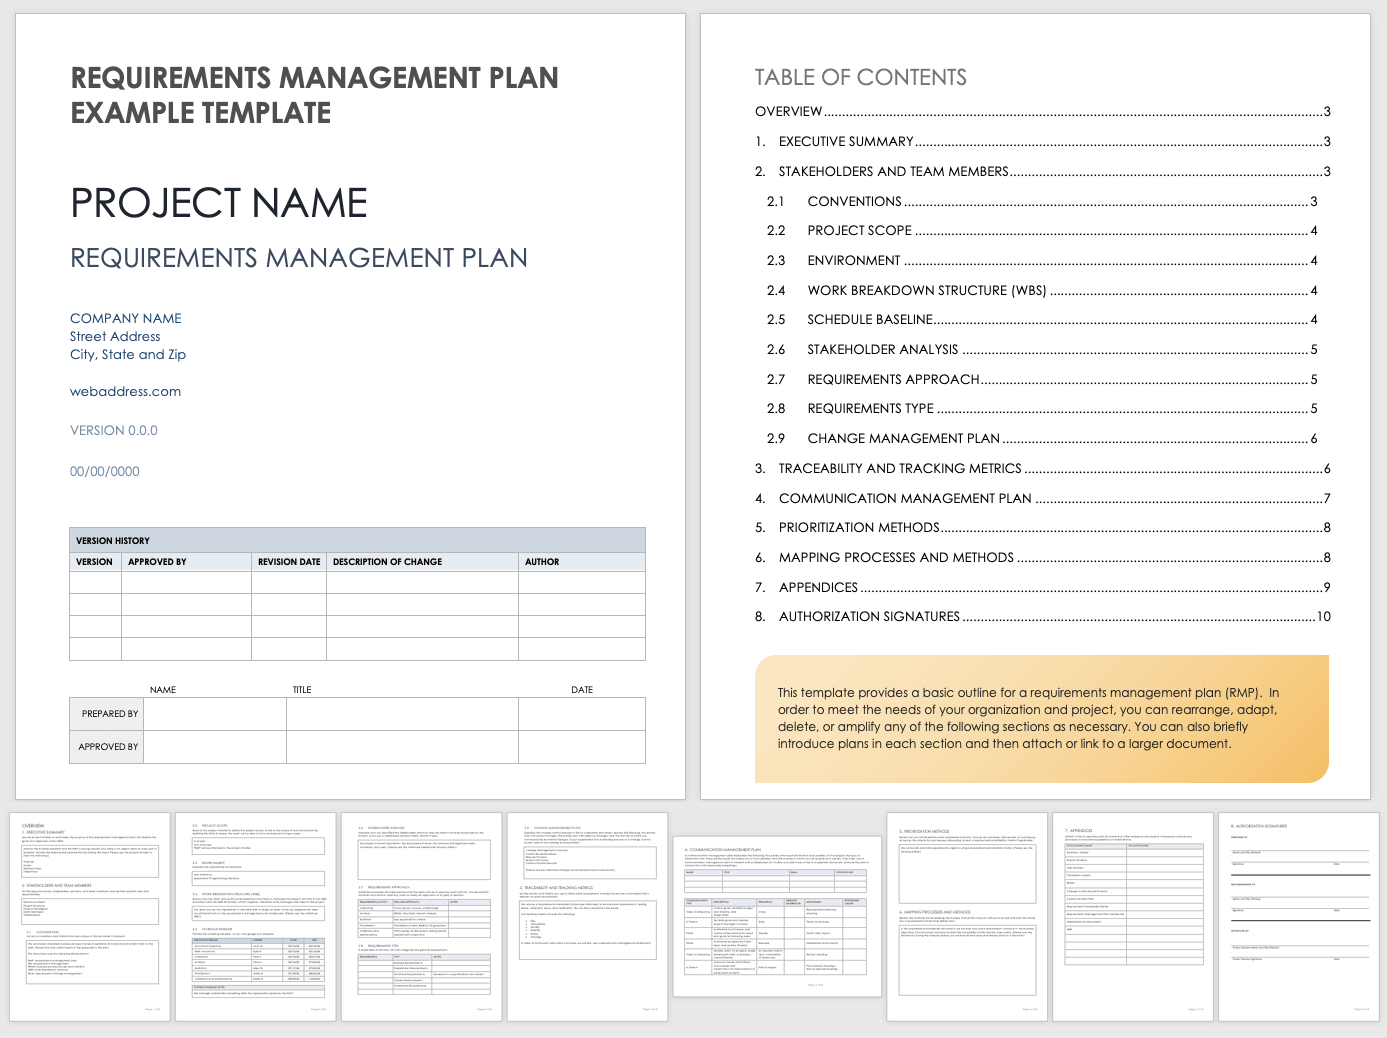 Requirements Management Plan Example